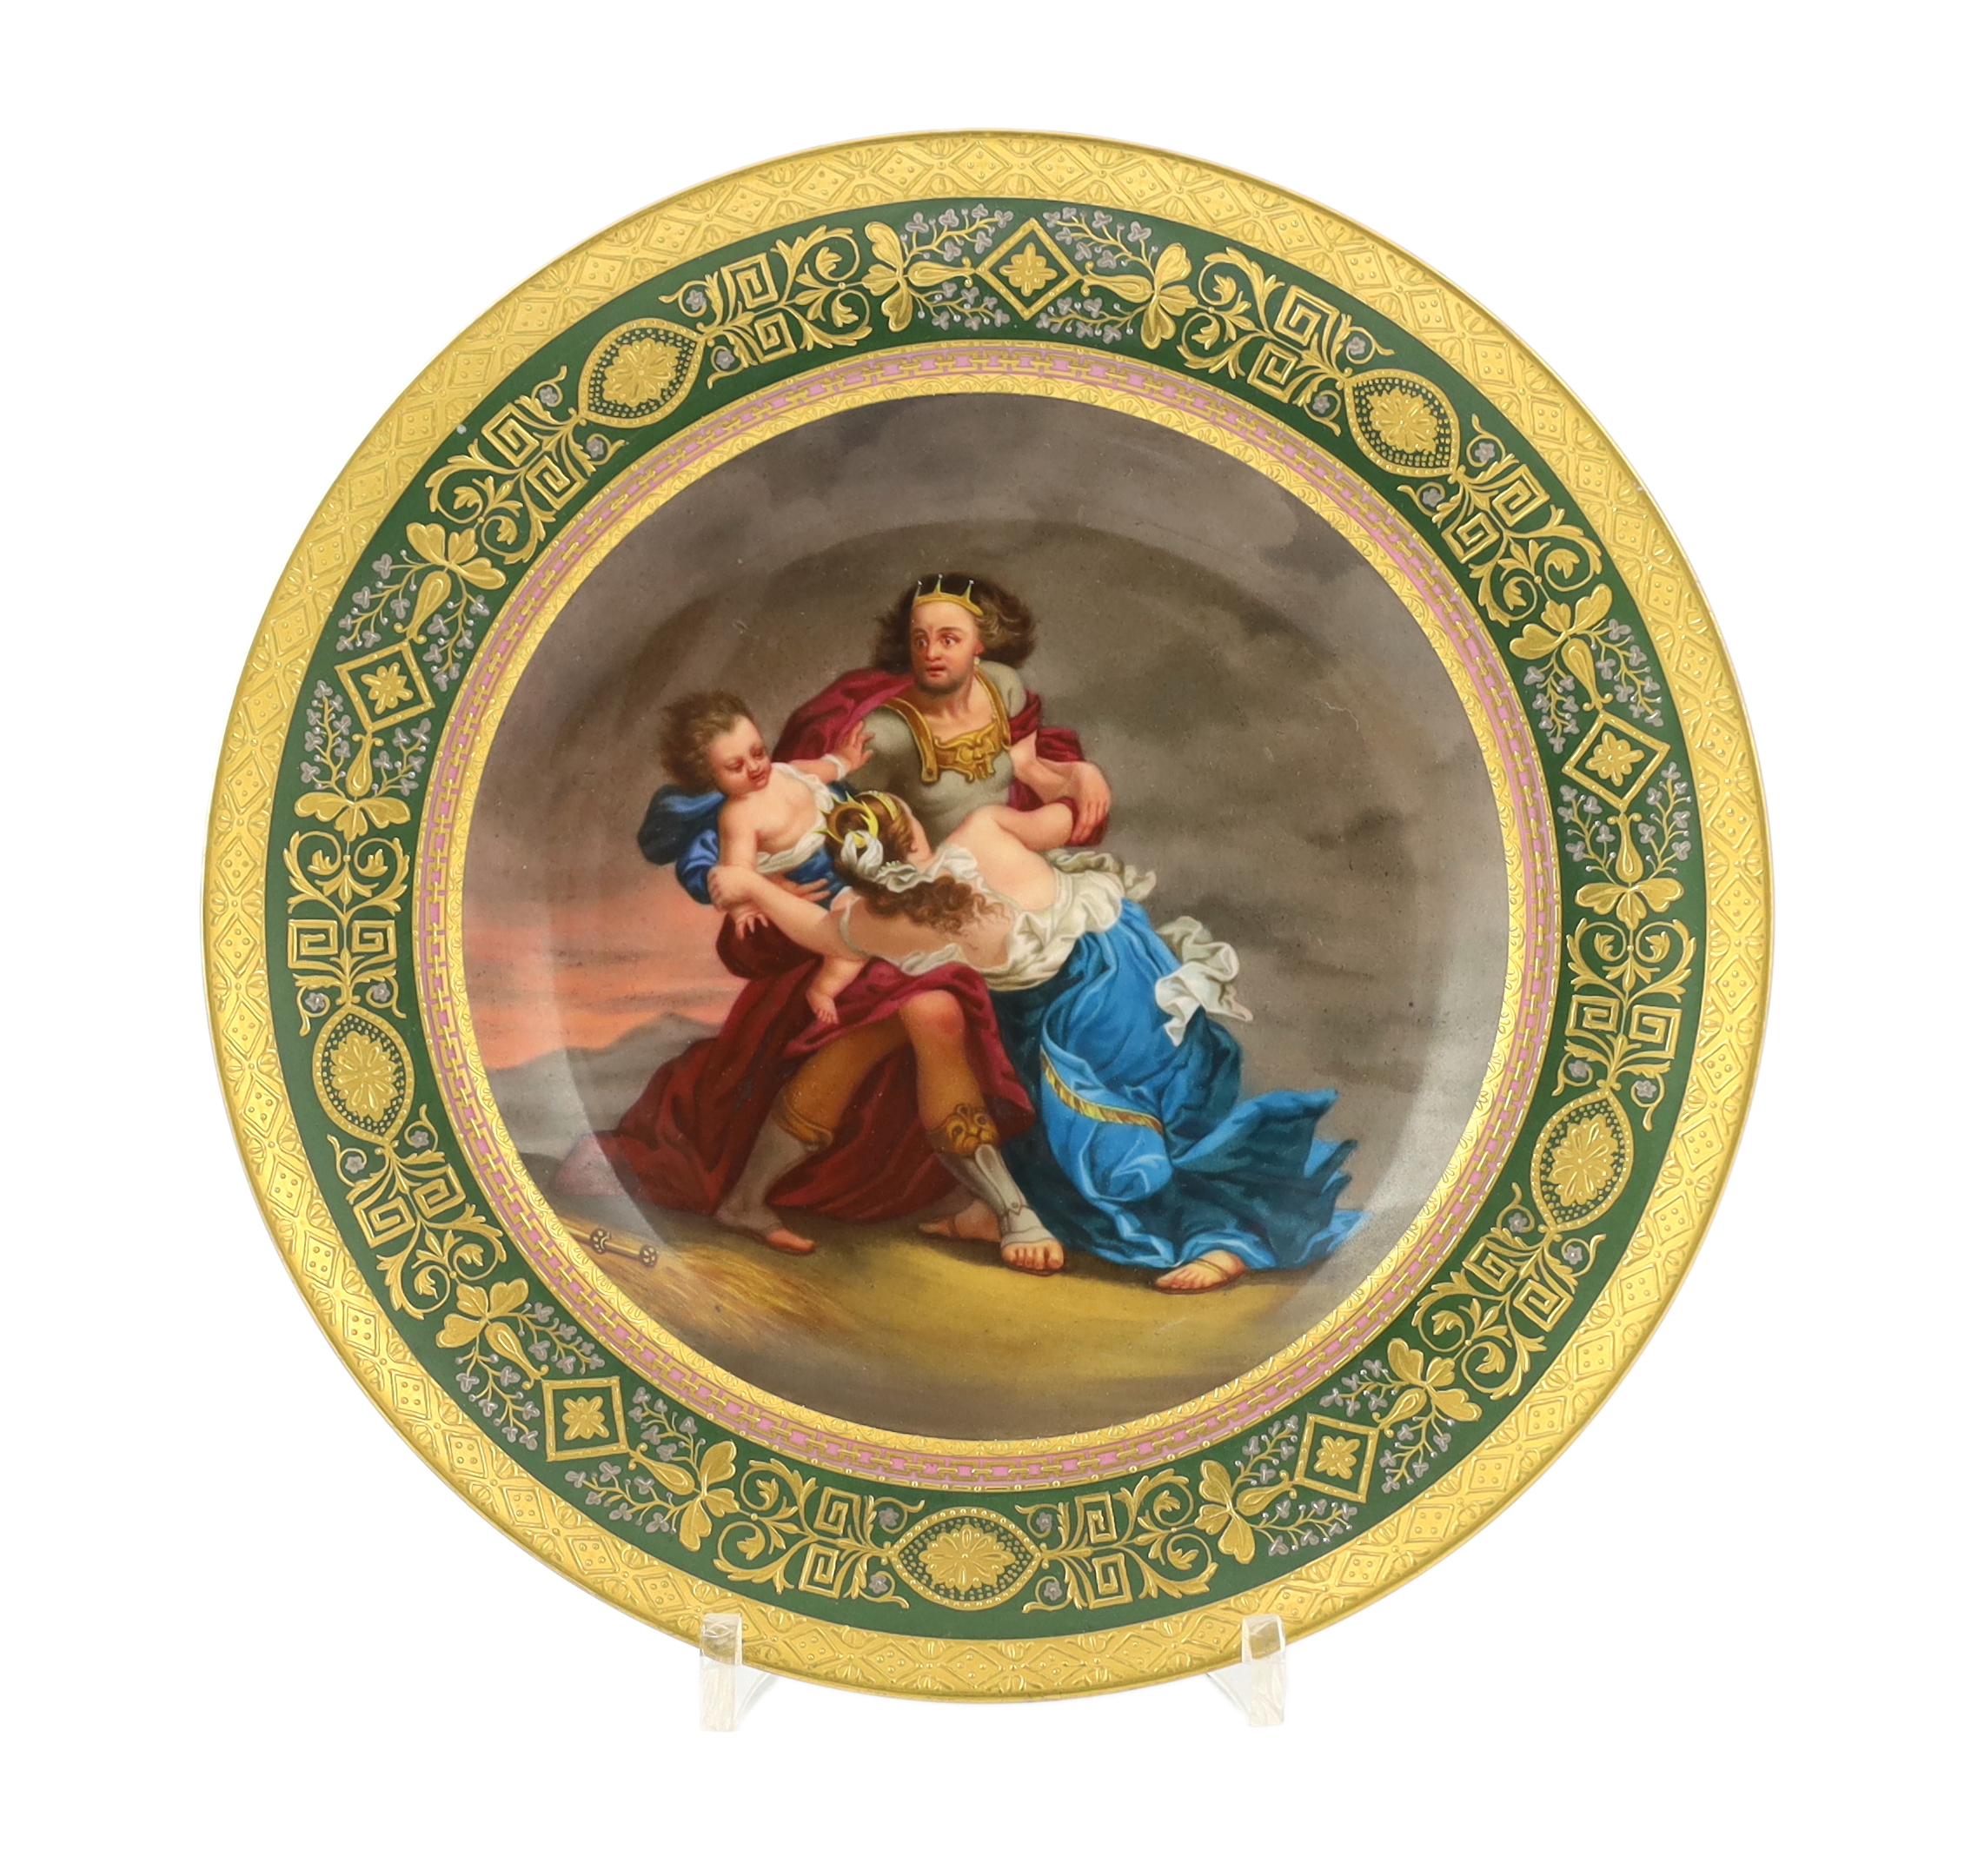 A Vienna porcelain plate, mid 19th century                                                                                                                                                                                  